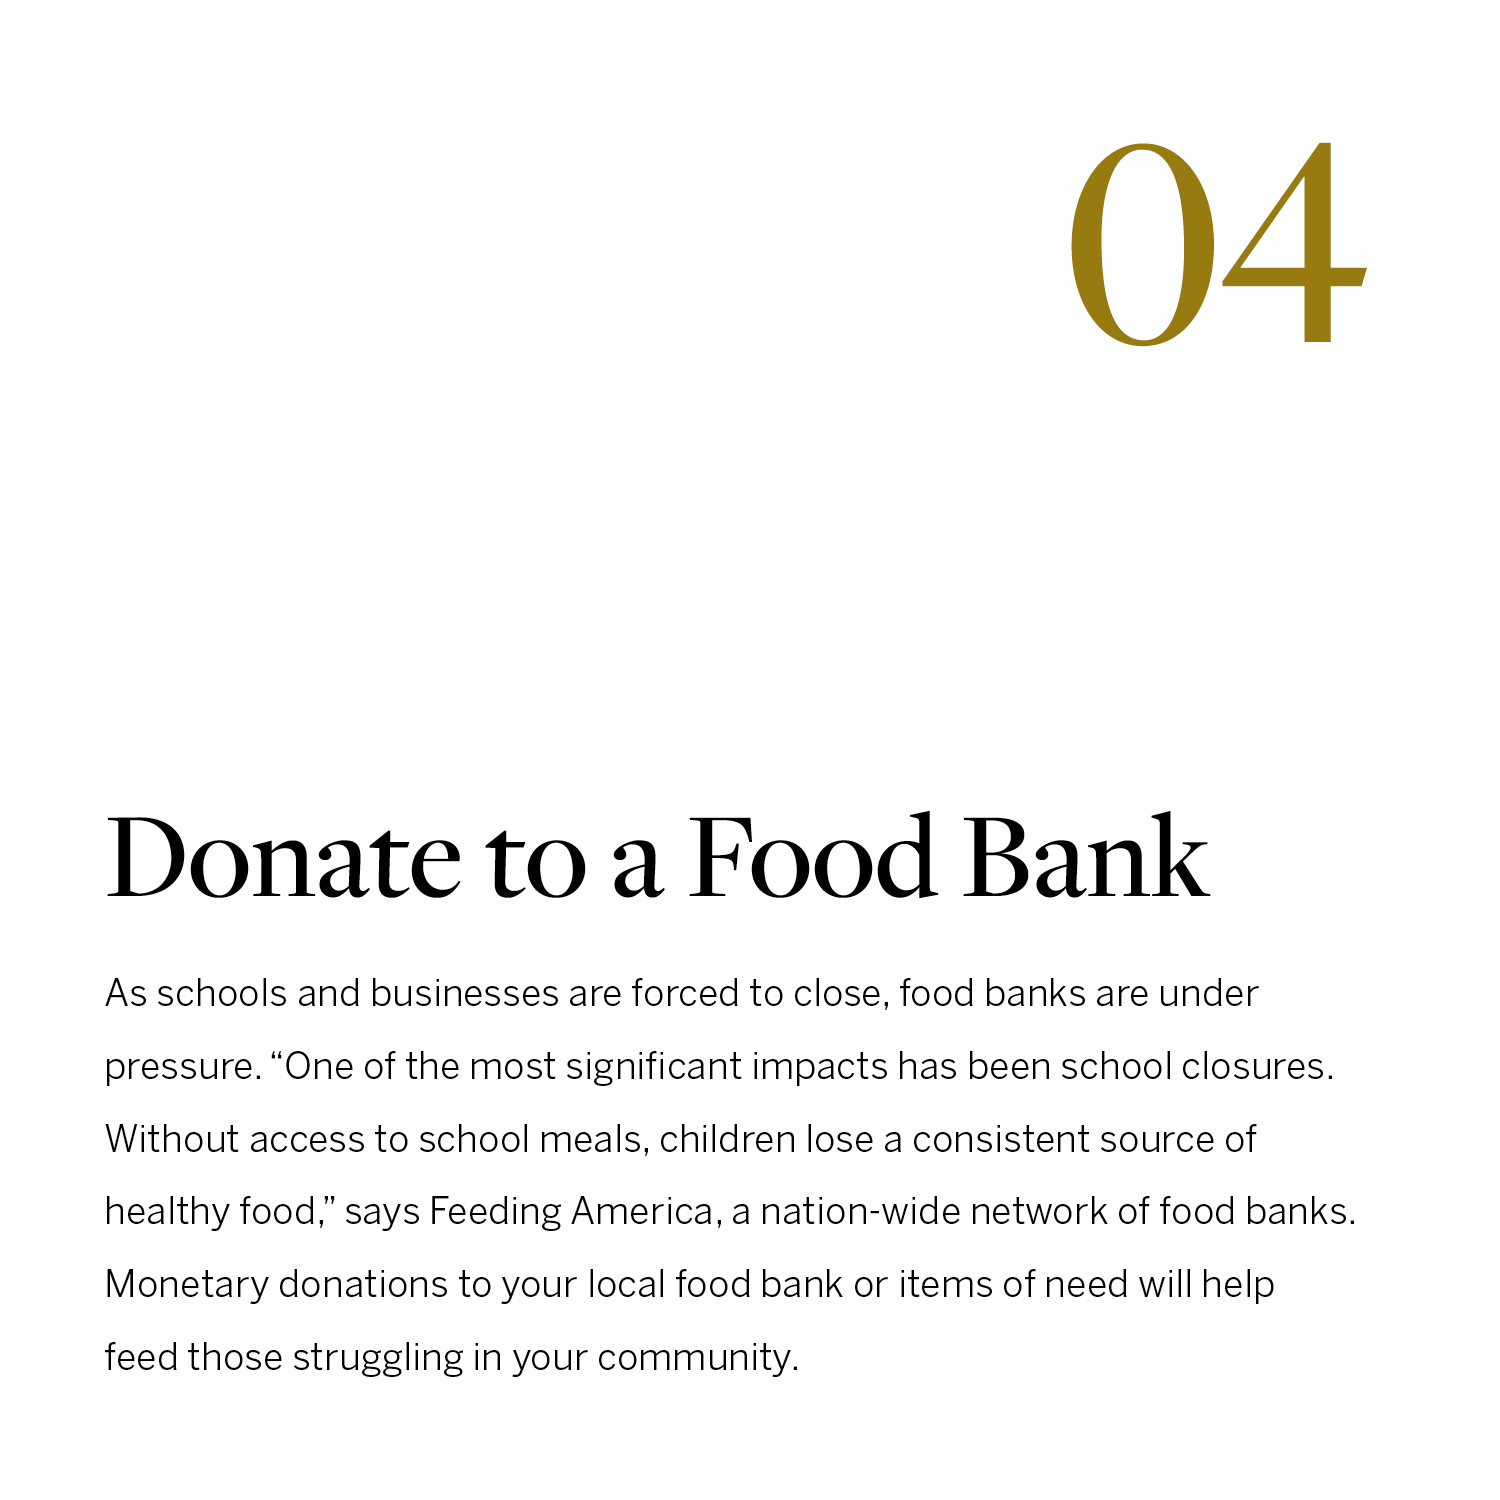 Donate to a Food Bank